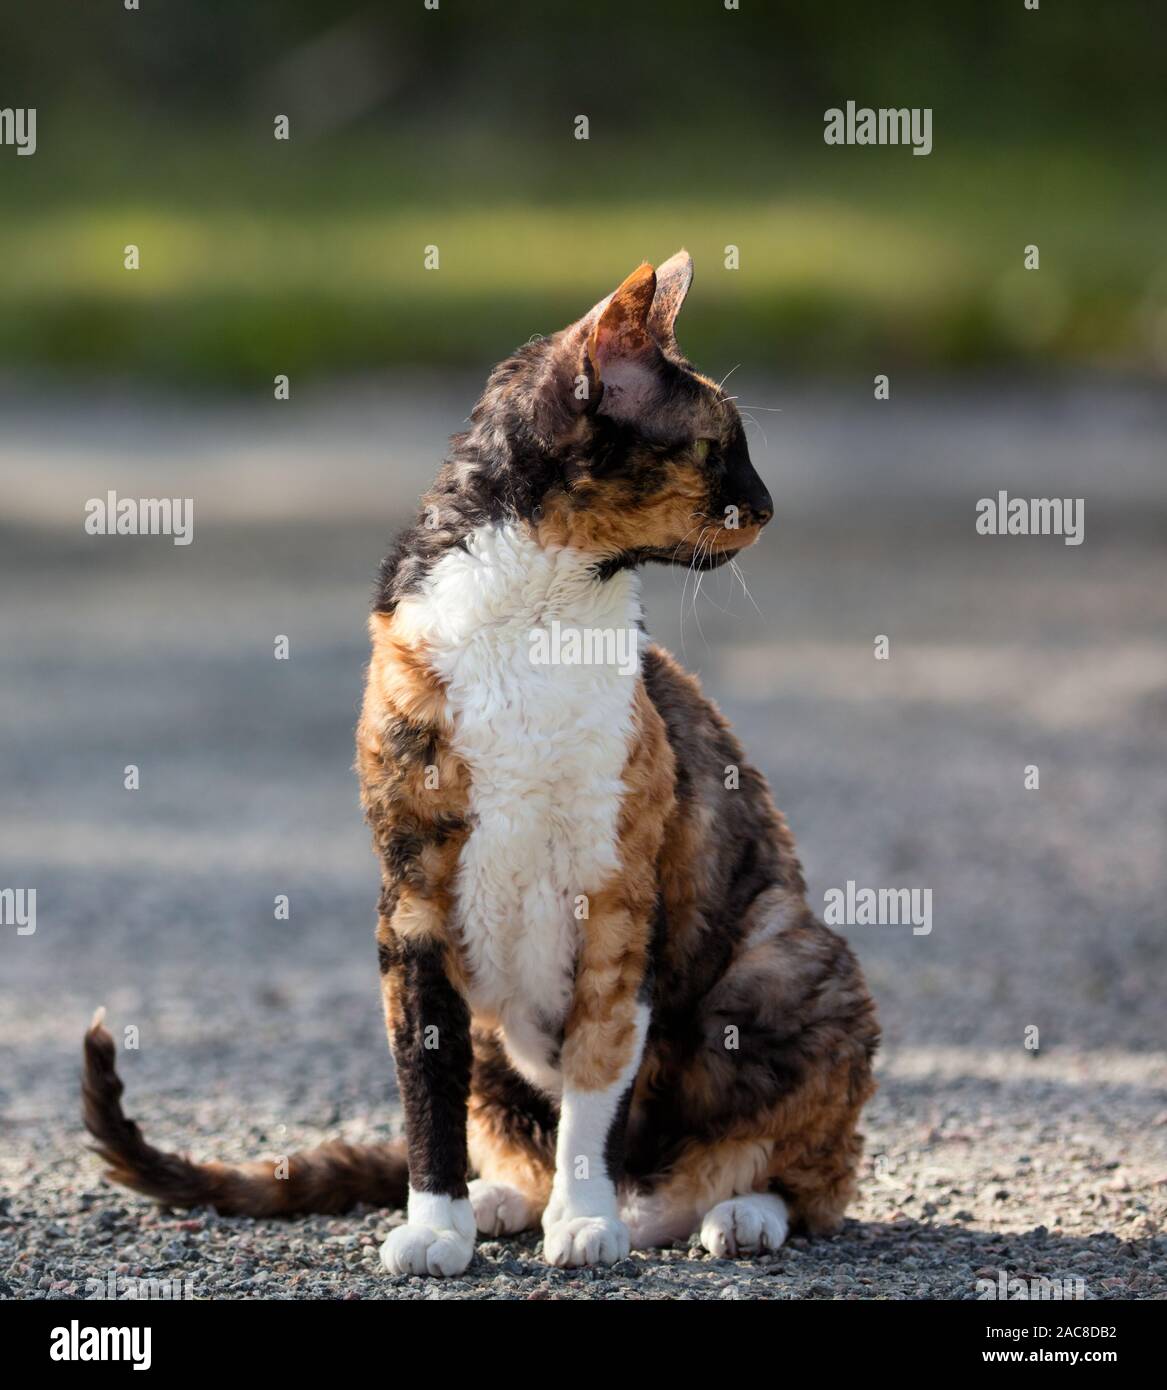 Colored Cornish Rex cat sitting on gravel and looking around Stock Photo